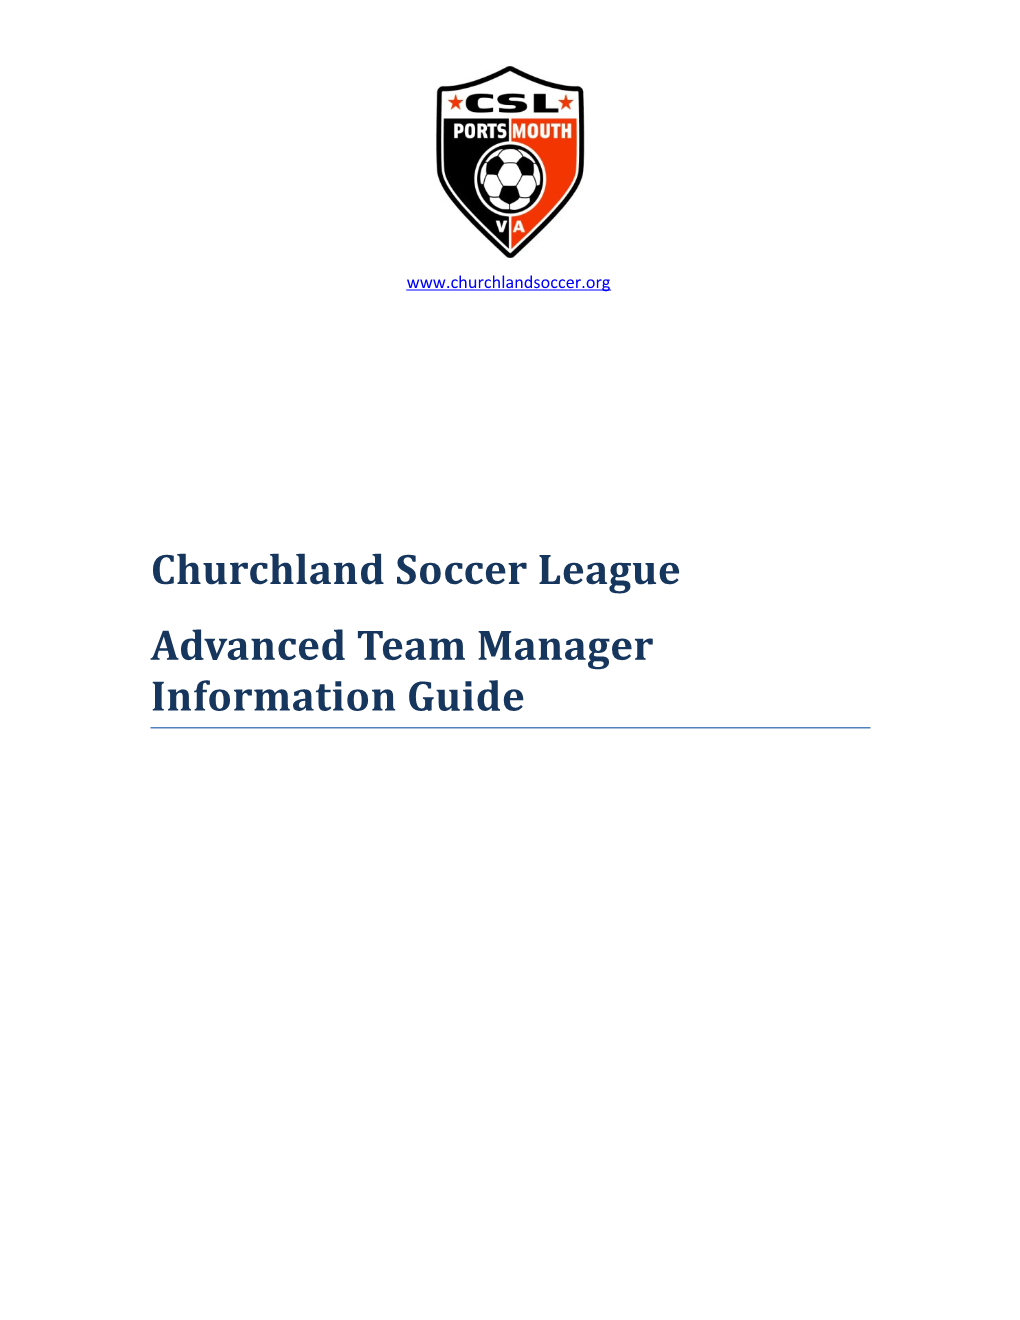 Advanced Team Manager Information Guide